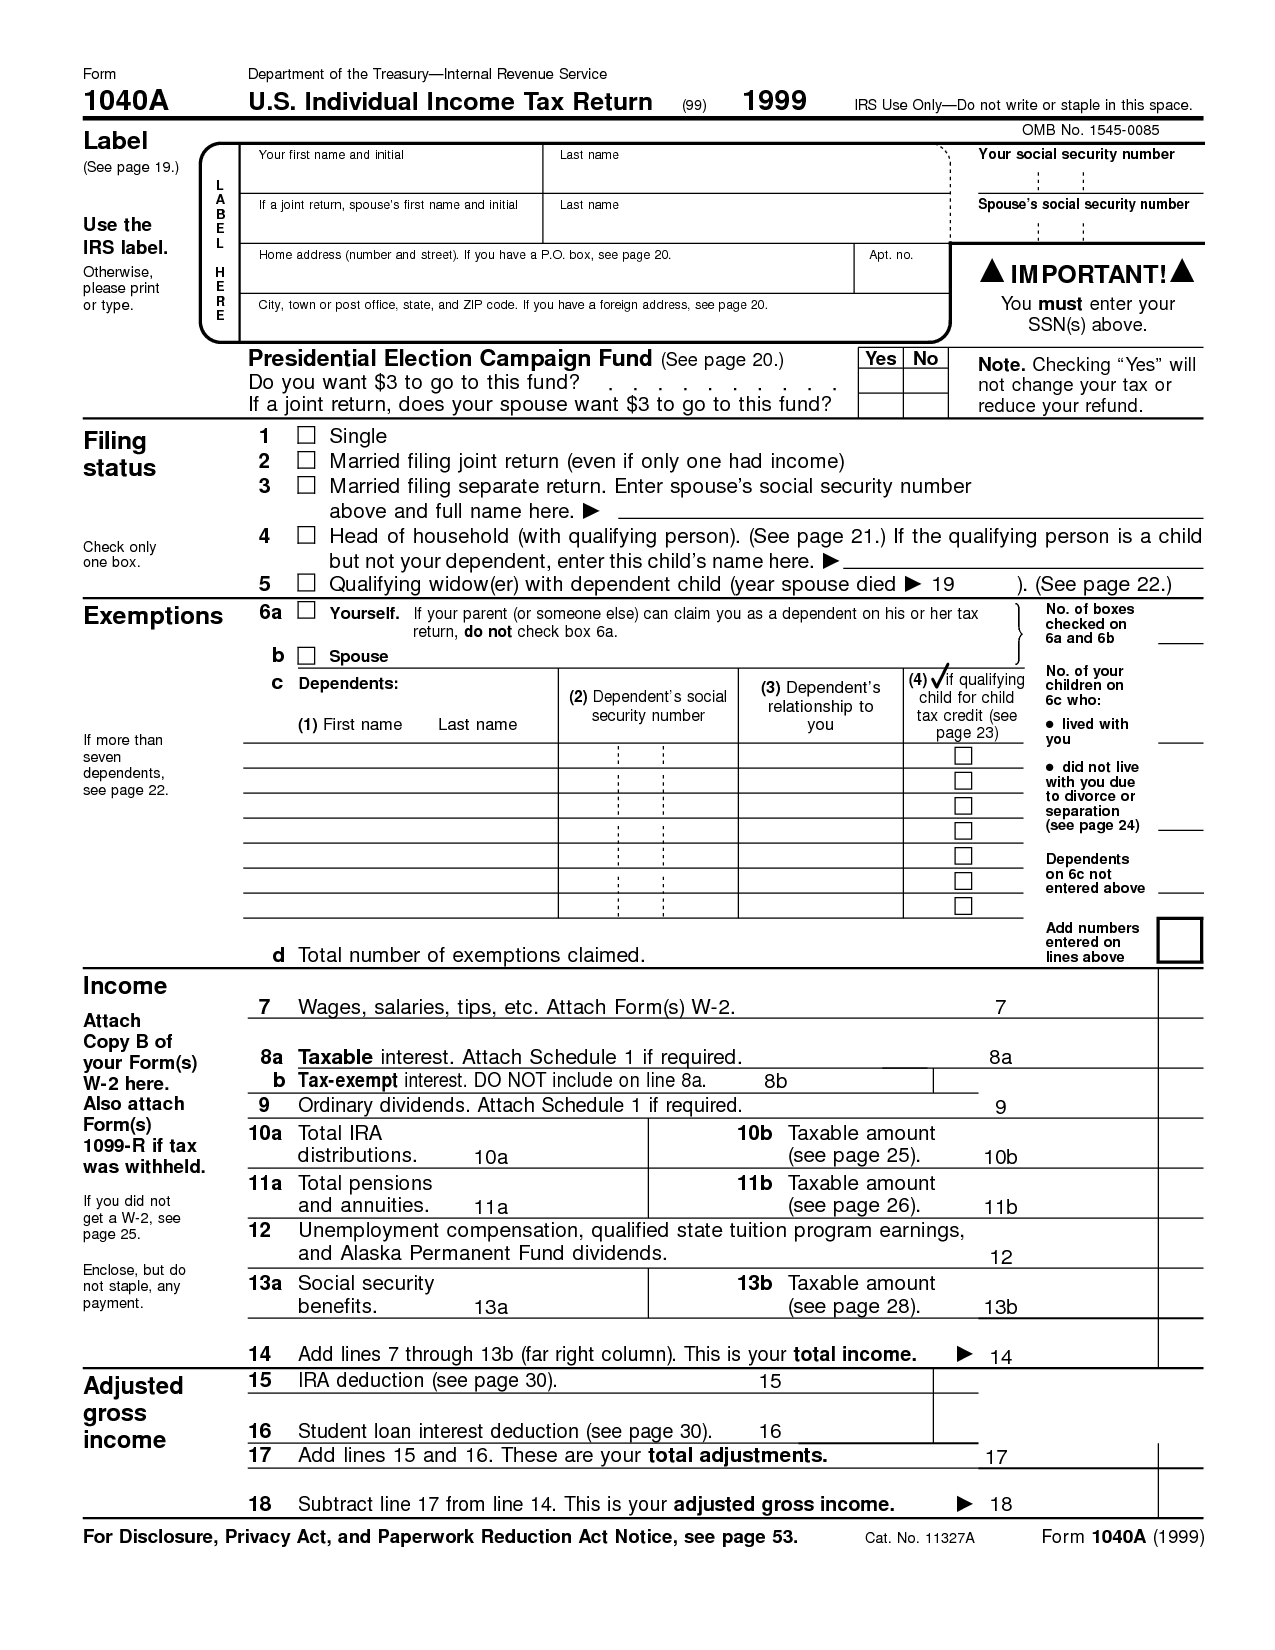 18 Best Images of Business Tax Organizer Worksheet  Tax Deduction Worksheet, IRS Itemized 